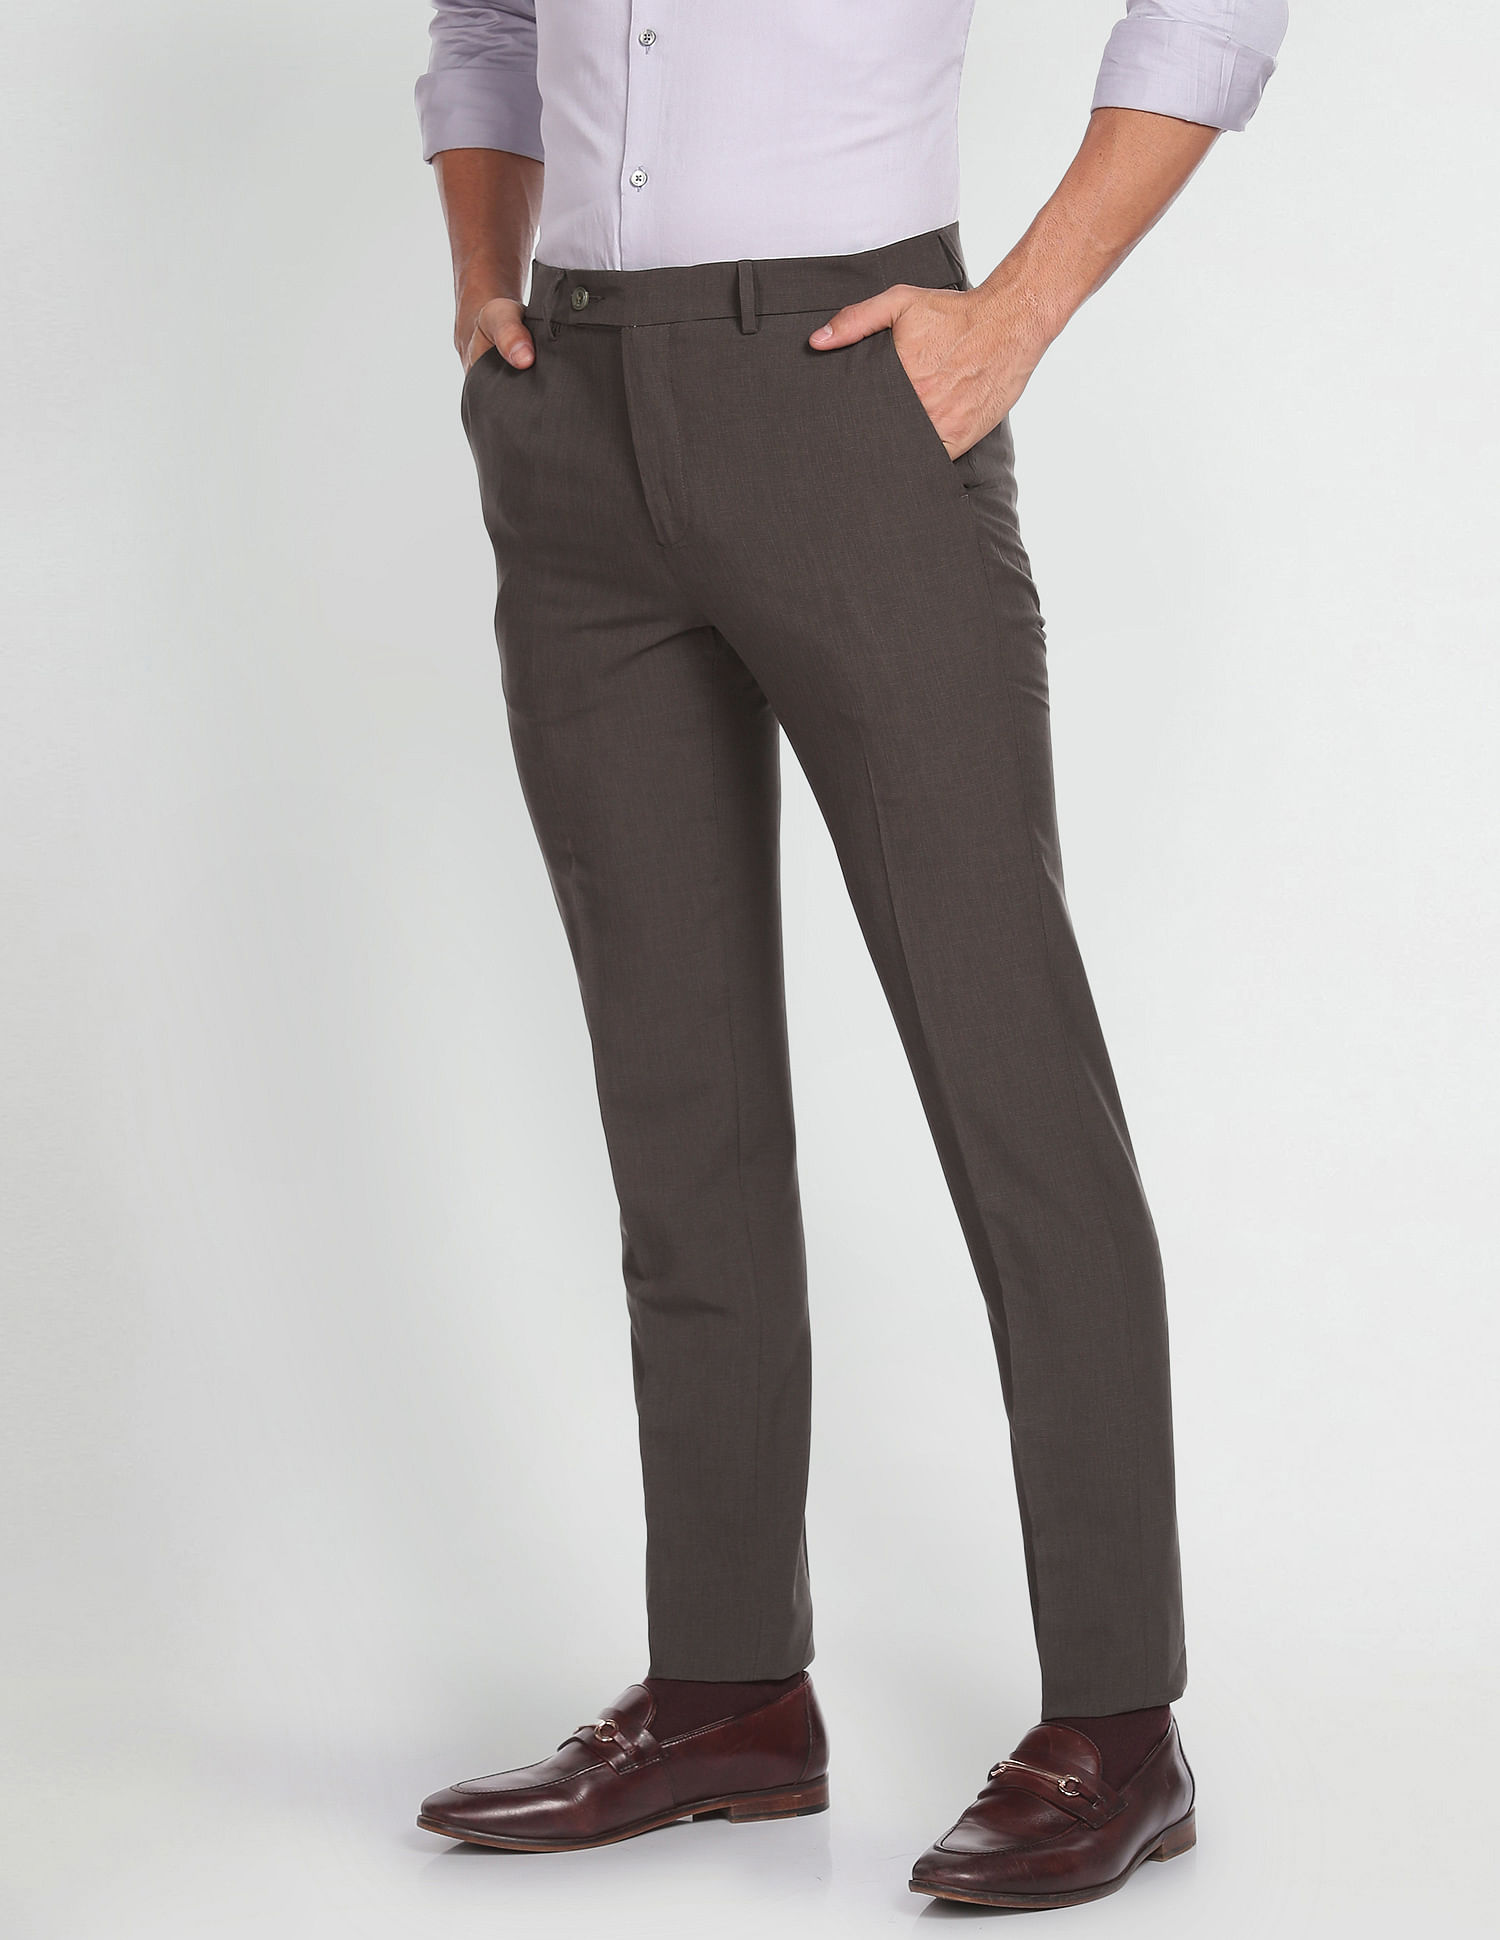 BKS276-Smitty Women's 100% Polyester Flat Front Pants w/ Western Cut P –  NFHS Officials Store